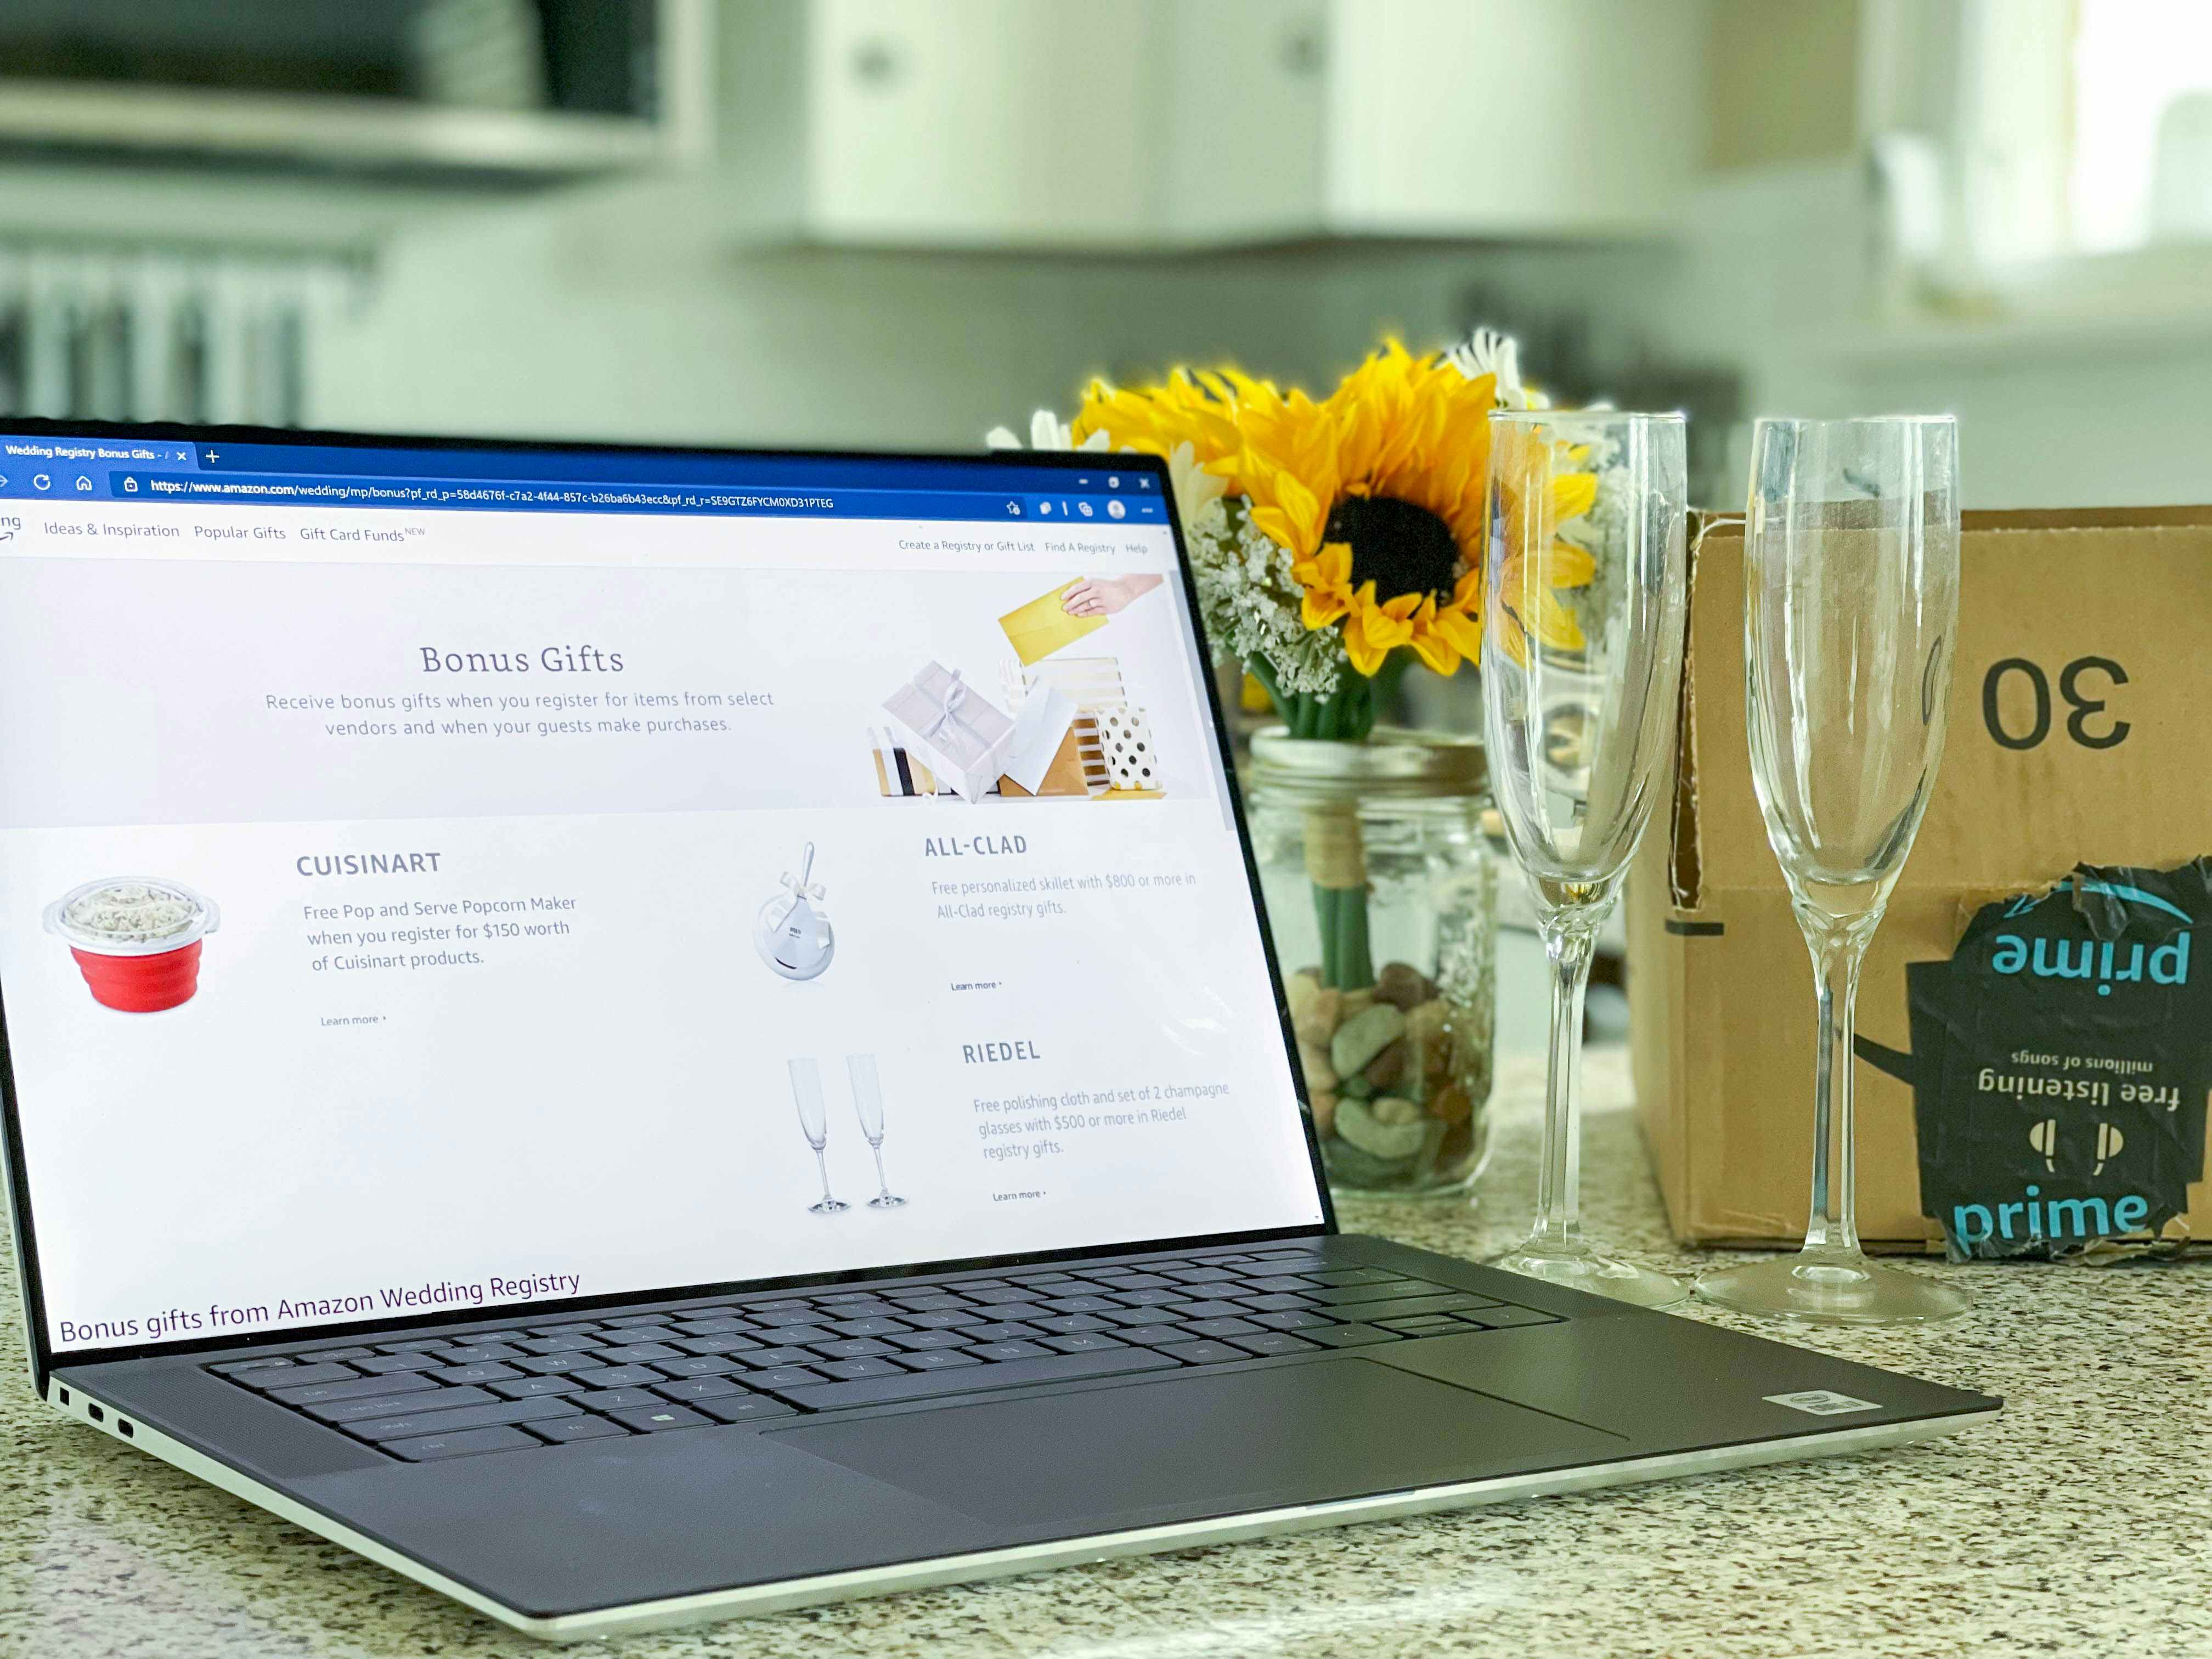 Amazon wedding registry gift page displayed on a laptop next to flowers, amazon box, and champagne flutes